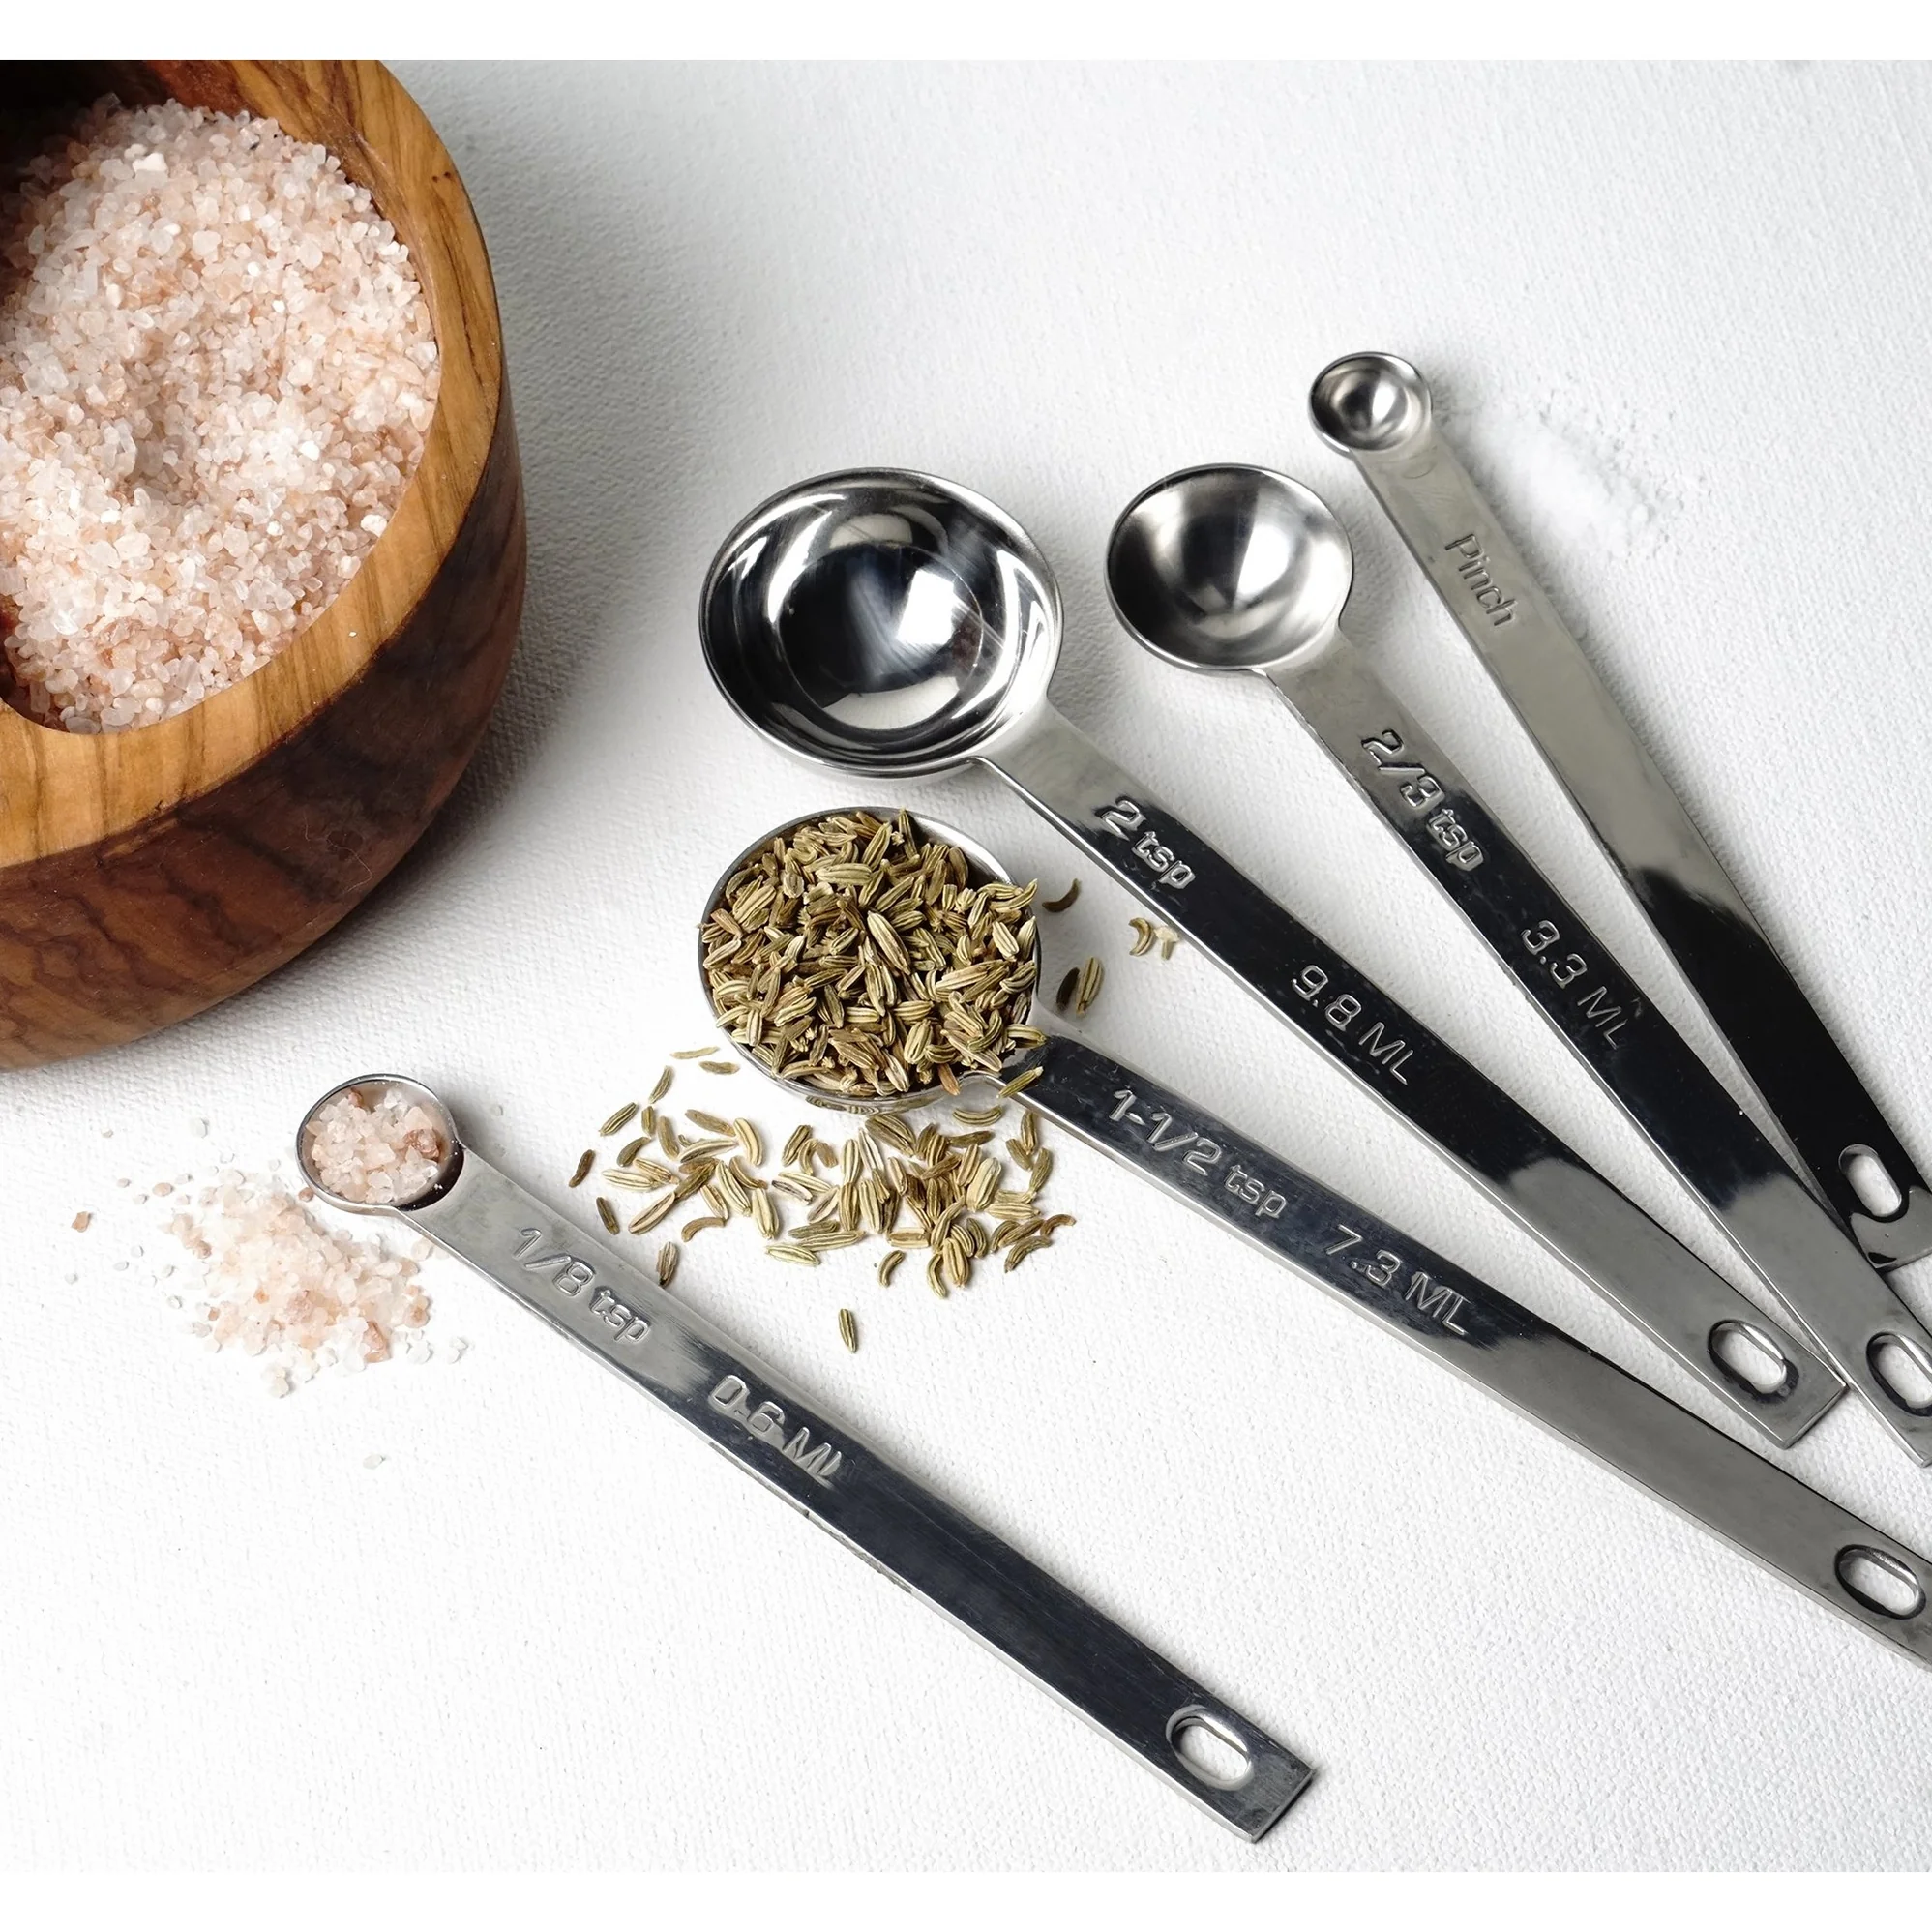 The Essential Kitchen Tools We Can't Live Without